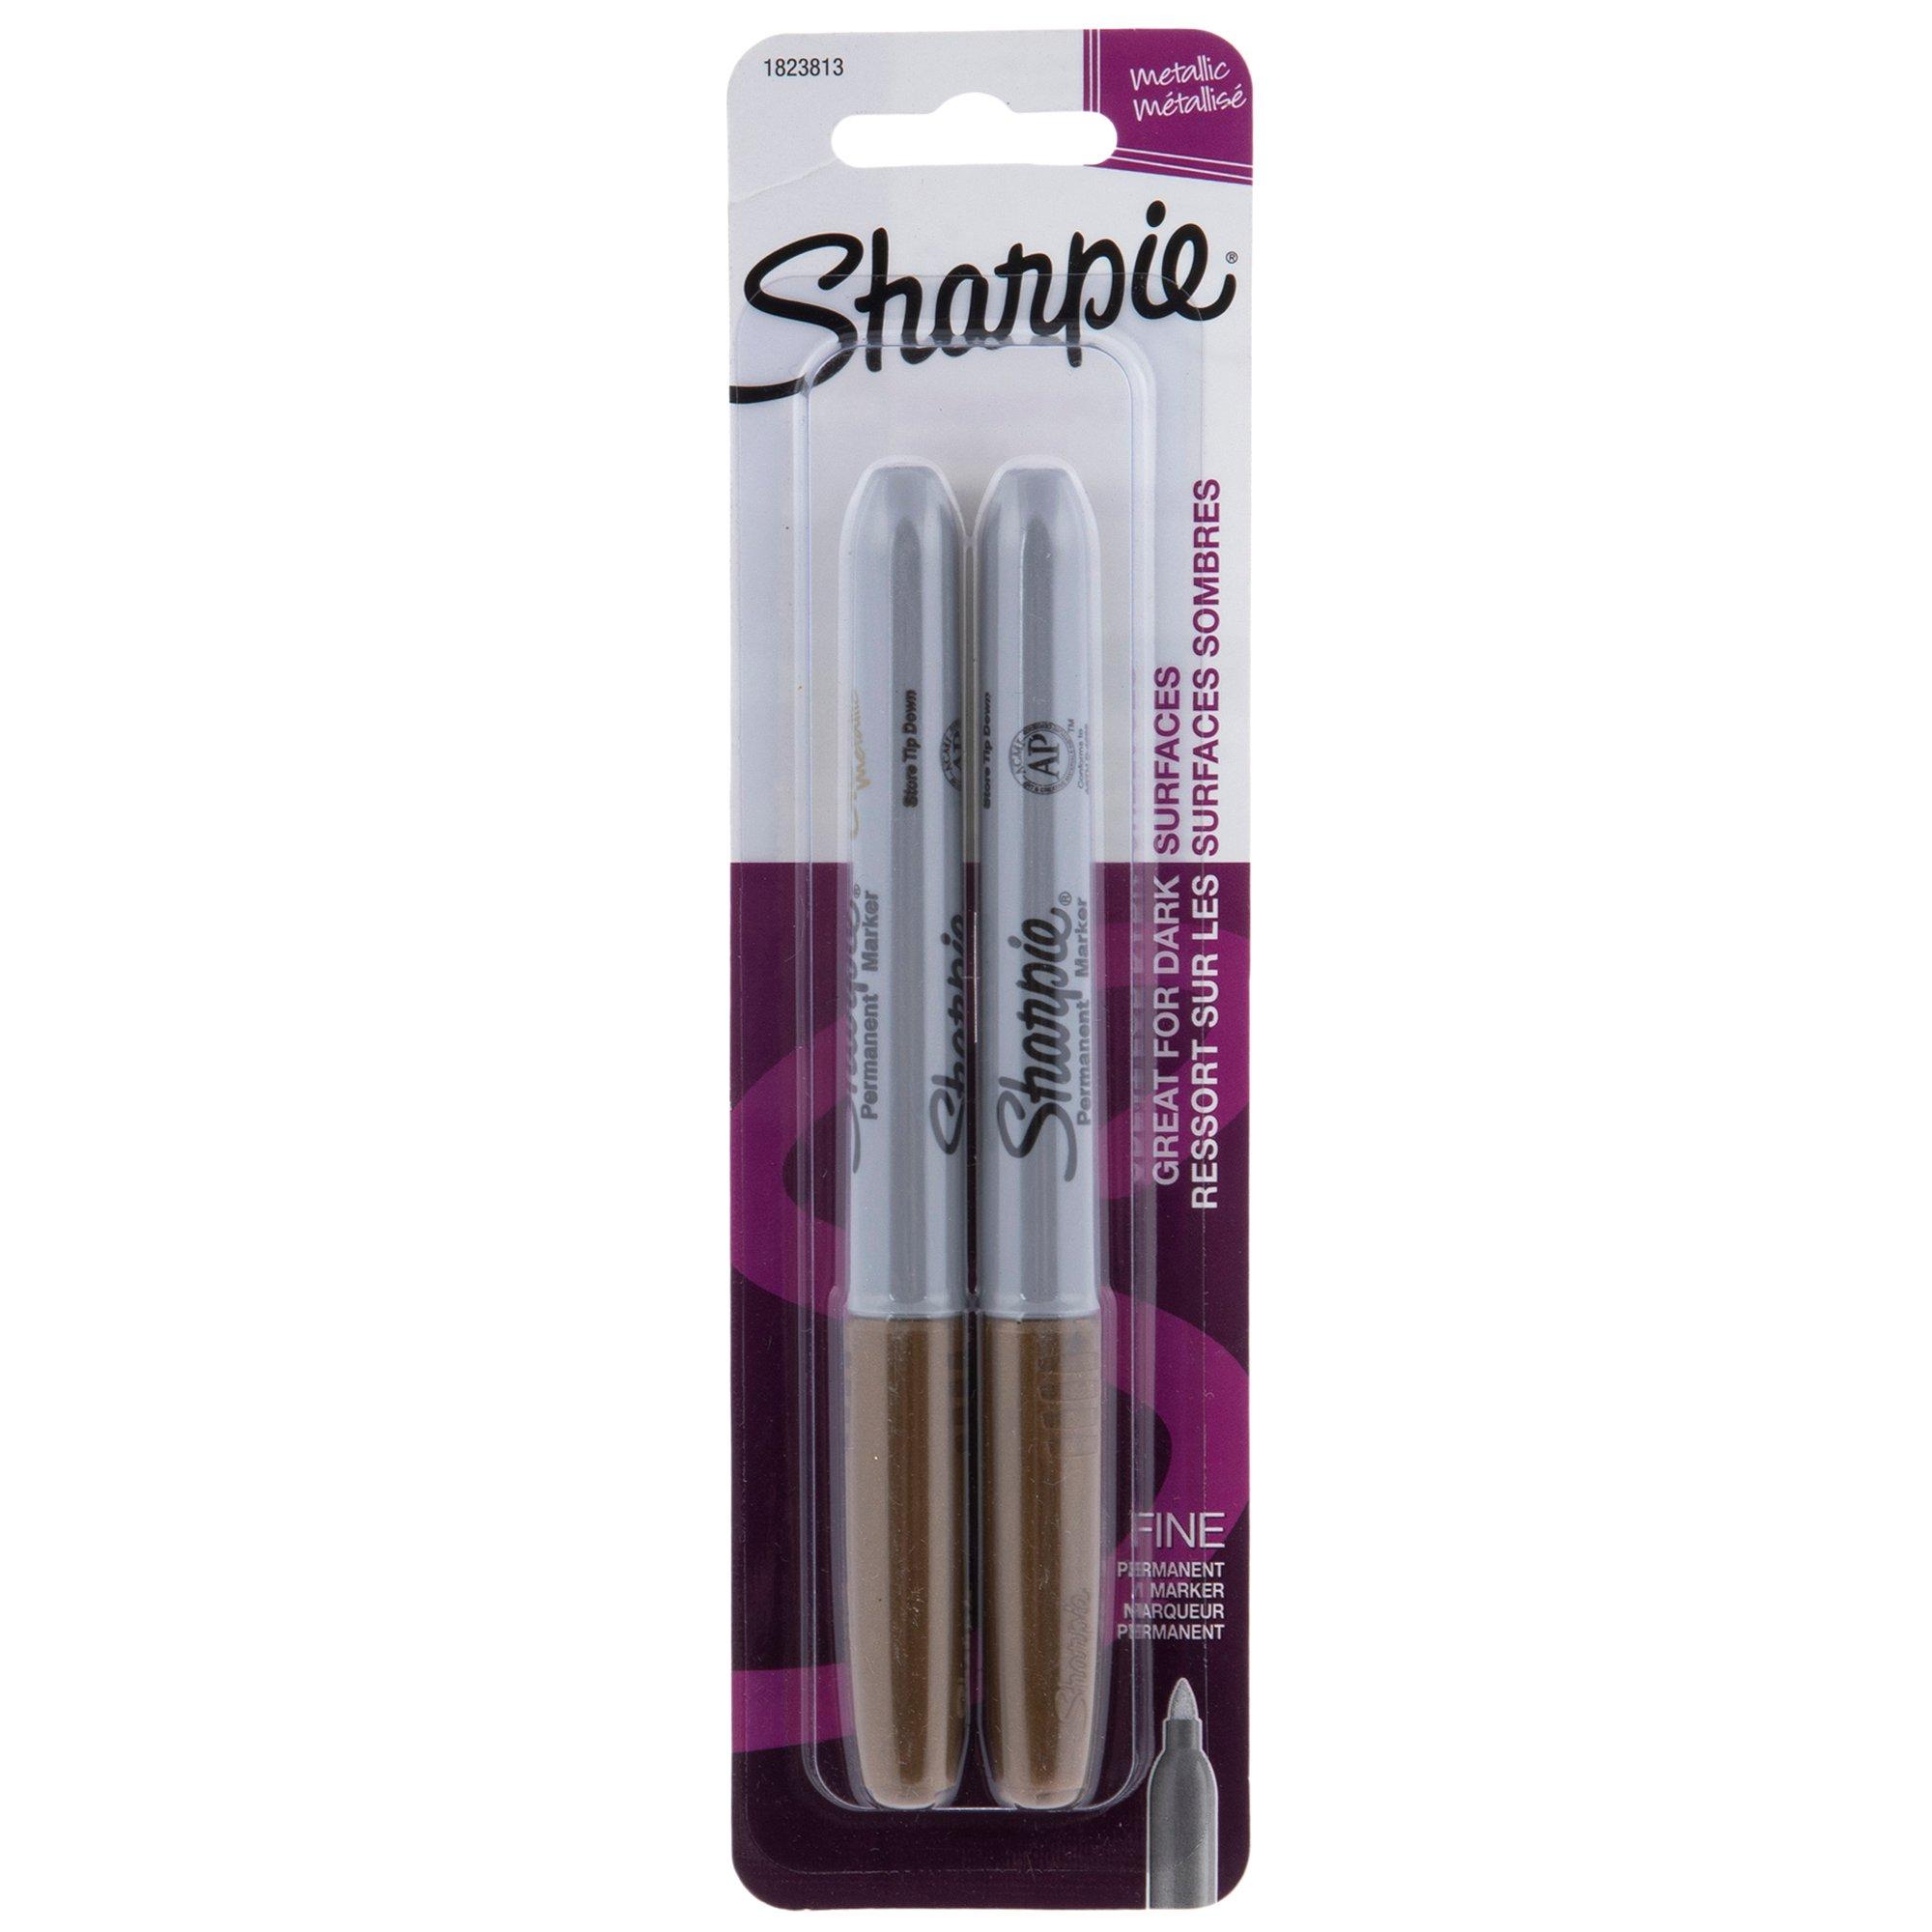 Sharpie Metallic Fine Point Permanent Markers, Gold - 2 pack